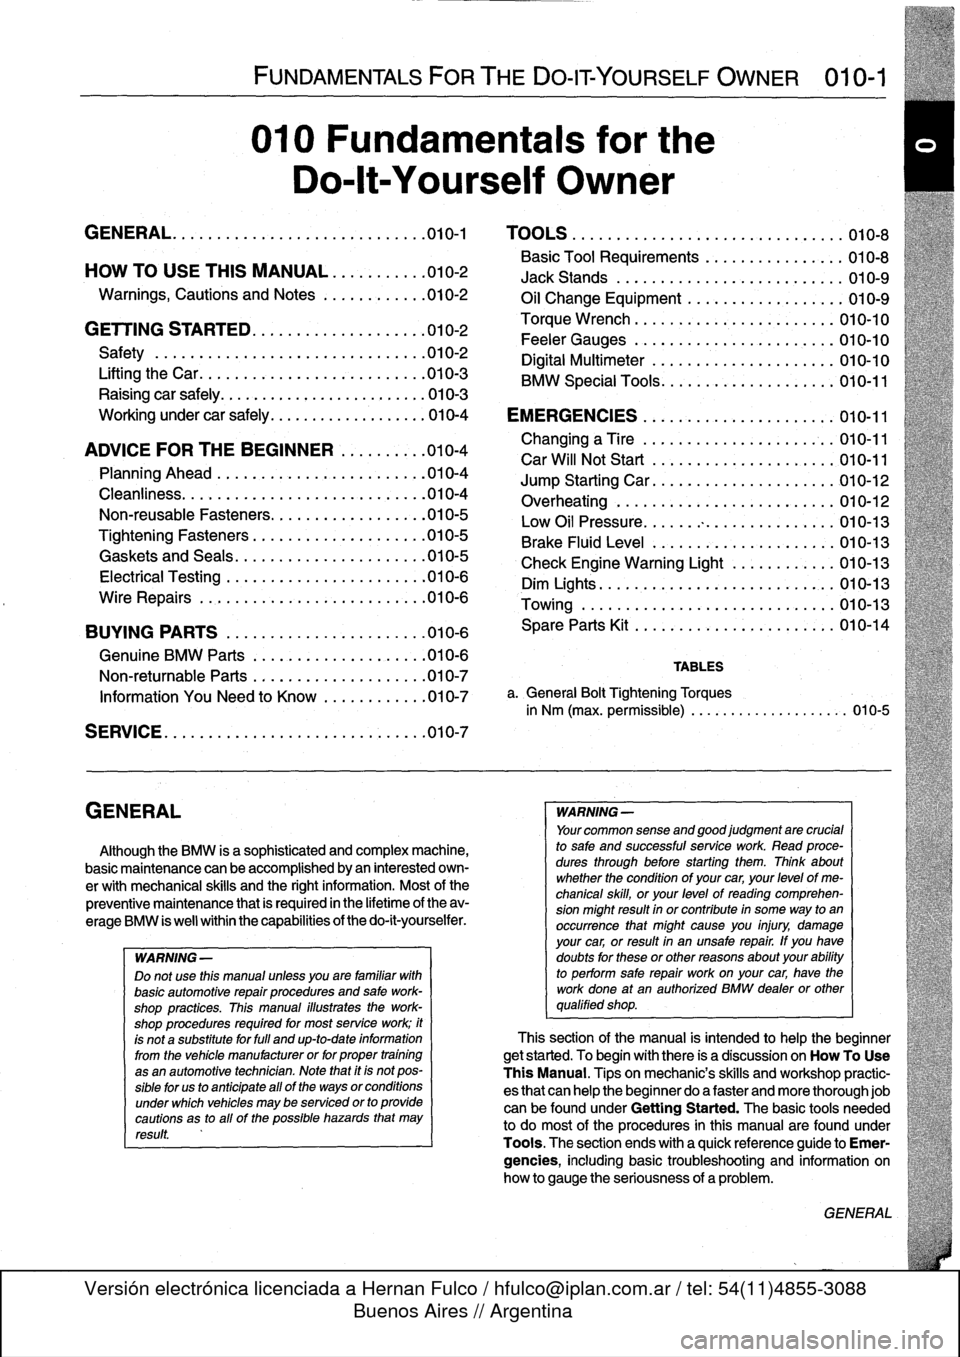 BMW 318i 1992 E36 Workshop Manual 
GENERAL

FUNDAMENTALS
FORTHE
DO-IT
YOURSELF
OWNER

	

010-1

010
Fundamentals
for
the

Do-lt-Yourself
Owner

GENERAL
.......
.
.
.
......
.
.........
.
.
.010-1

	

TOOLS
.
.
...
.
............
.
...